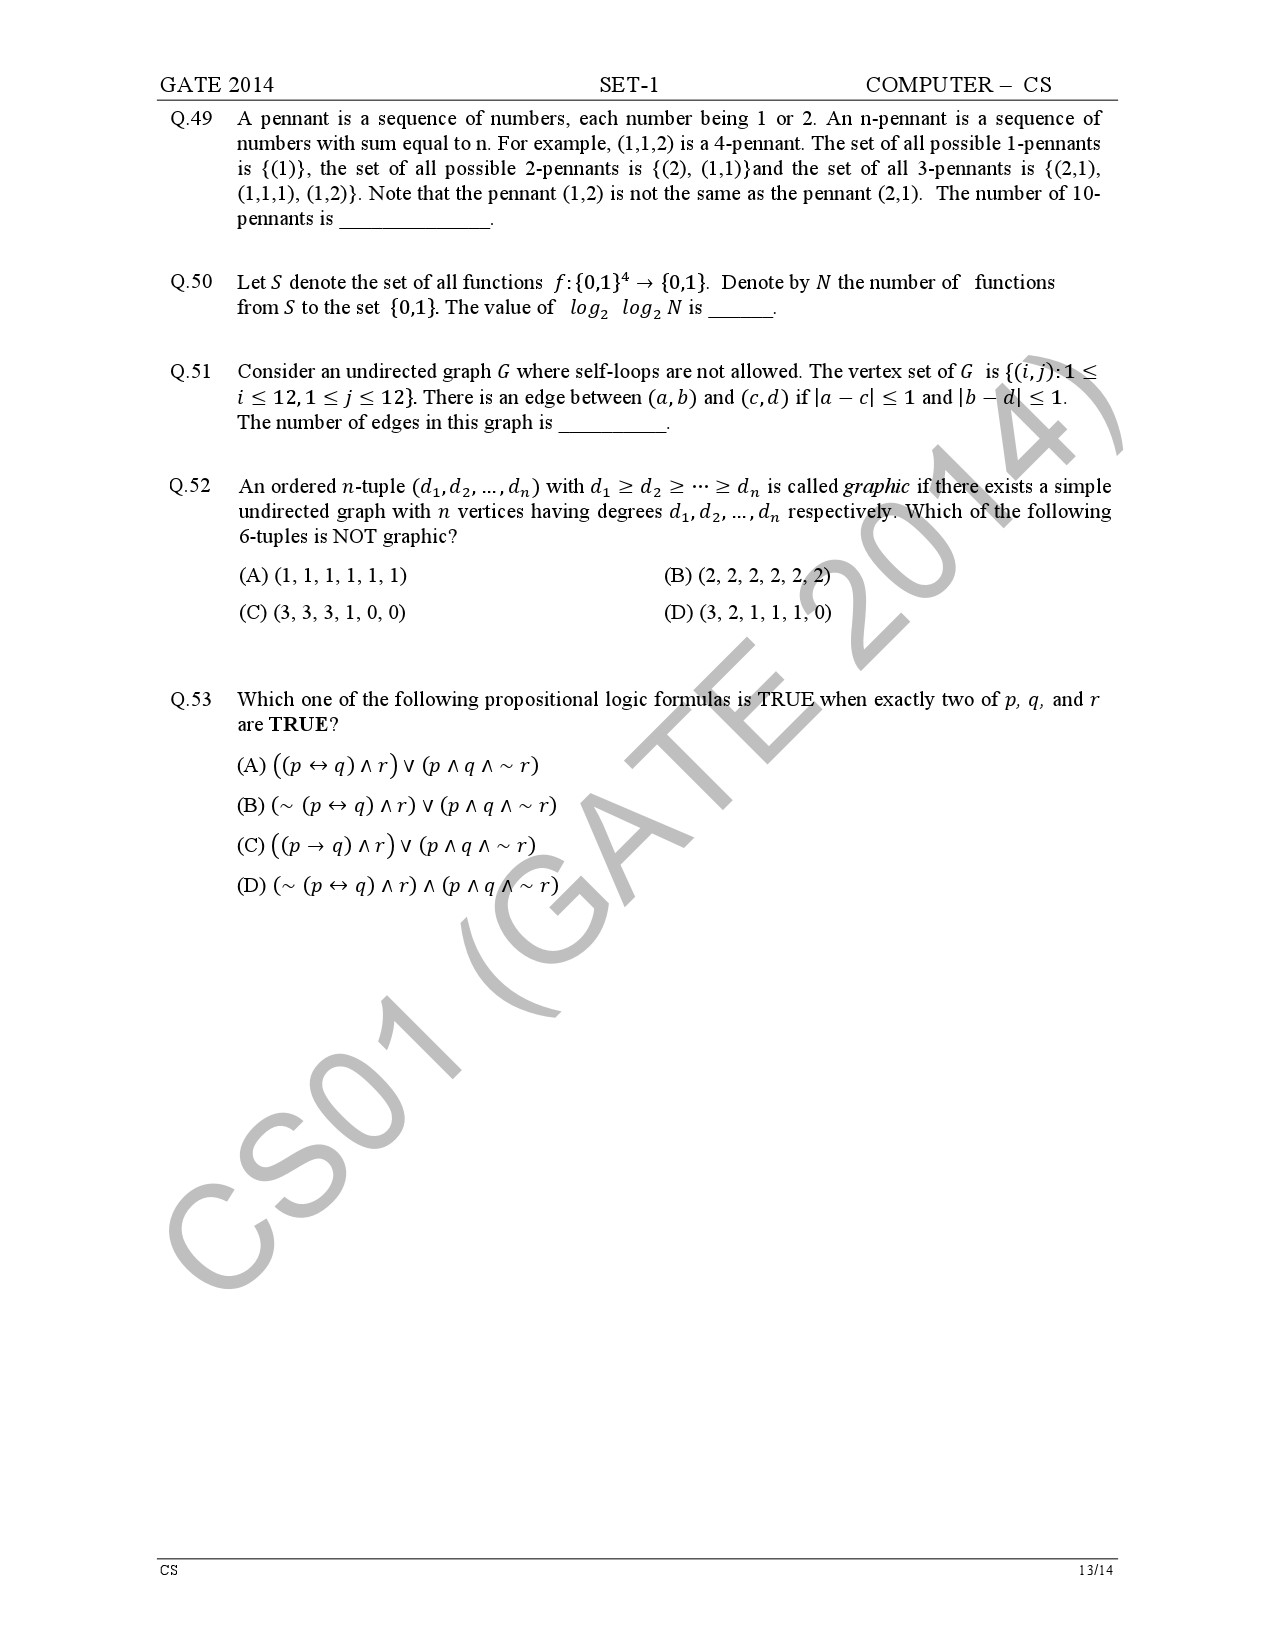 GATE Exam Question Paper 2014 Computer Science and Information Technology Set 1 19